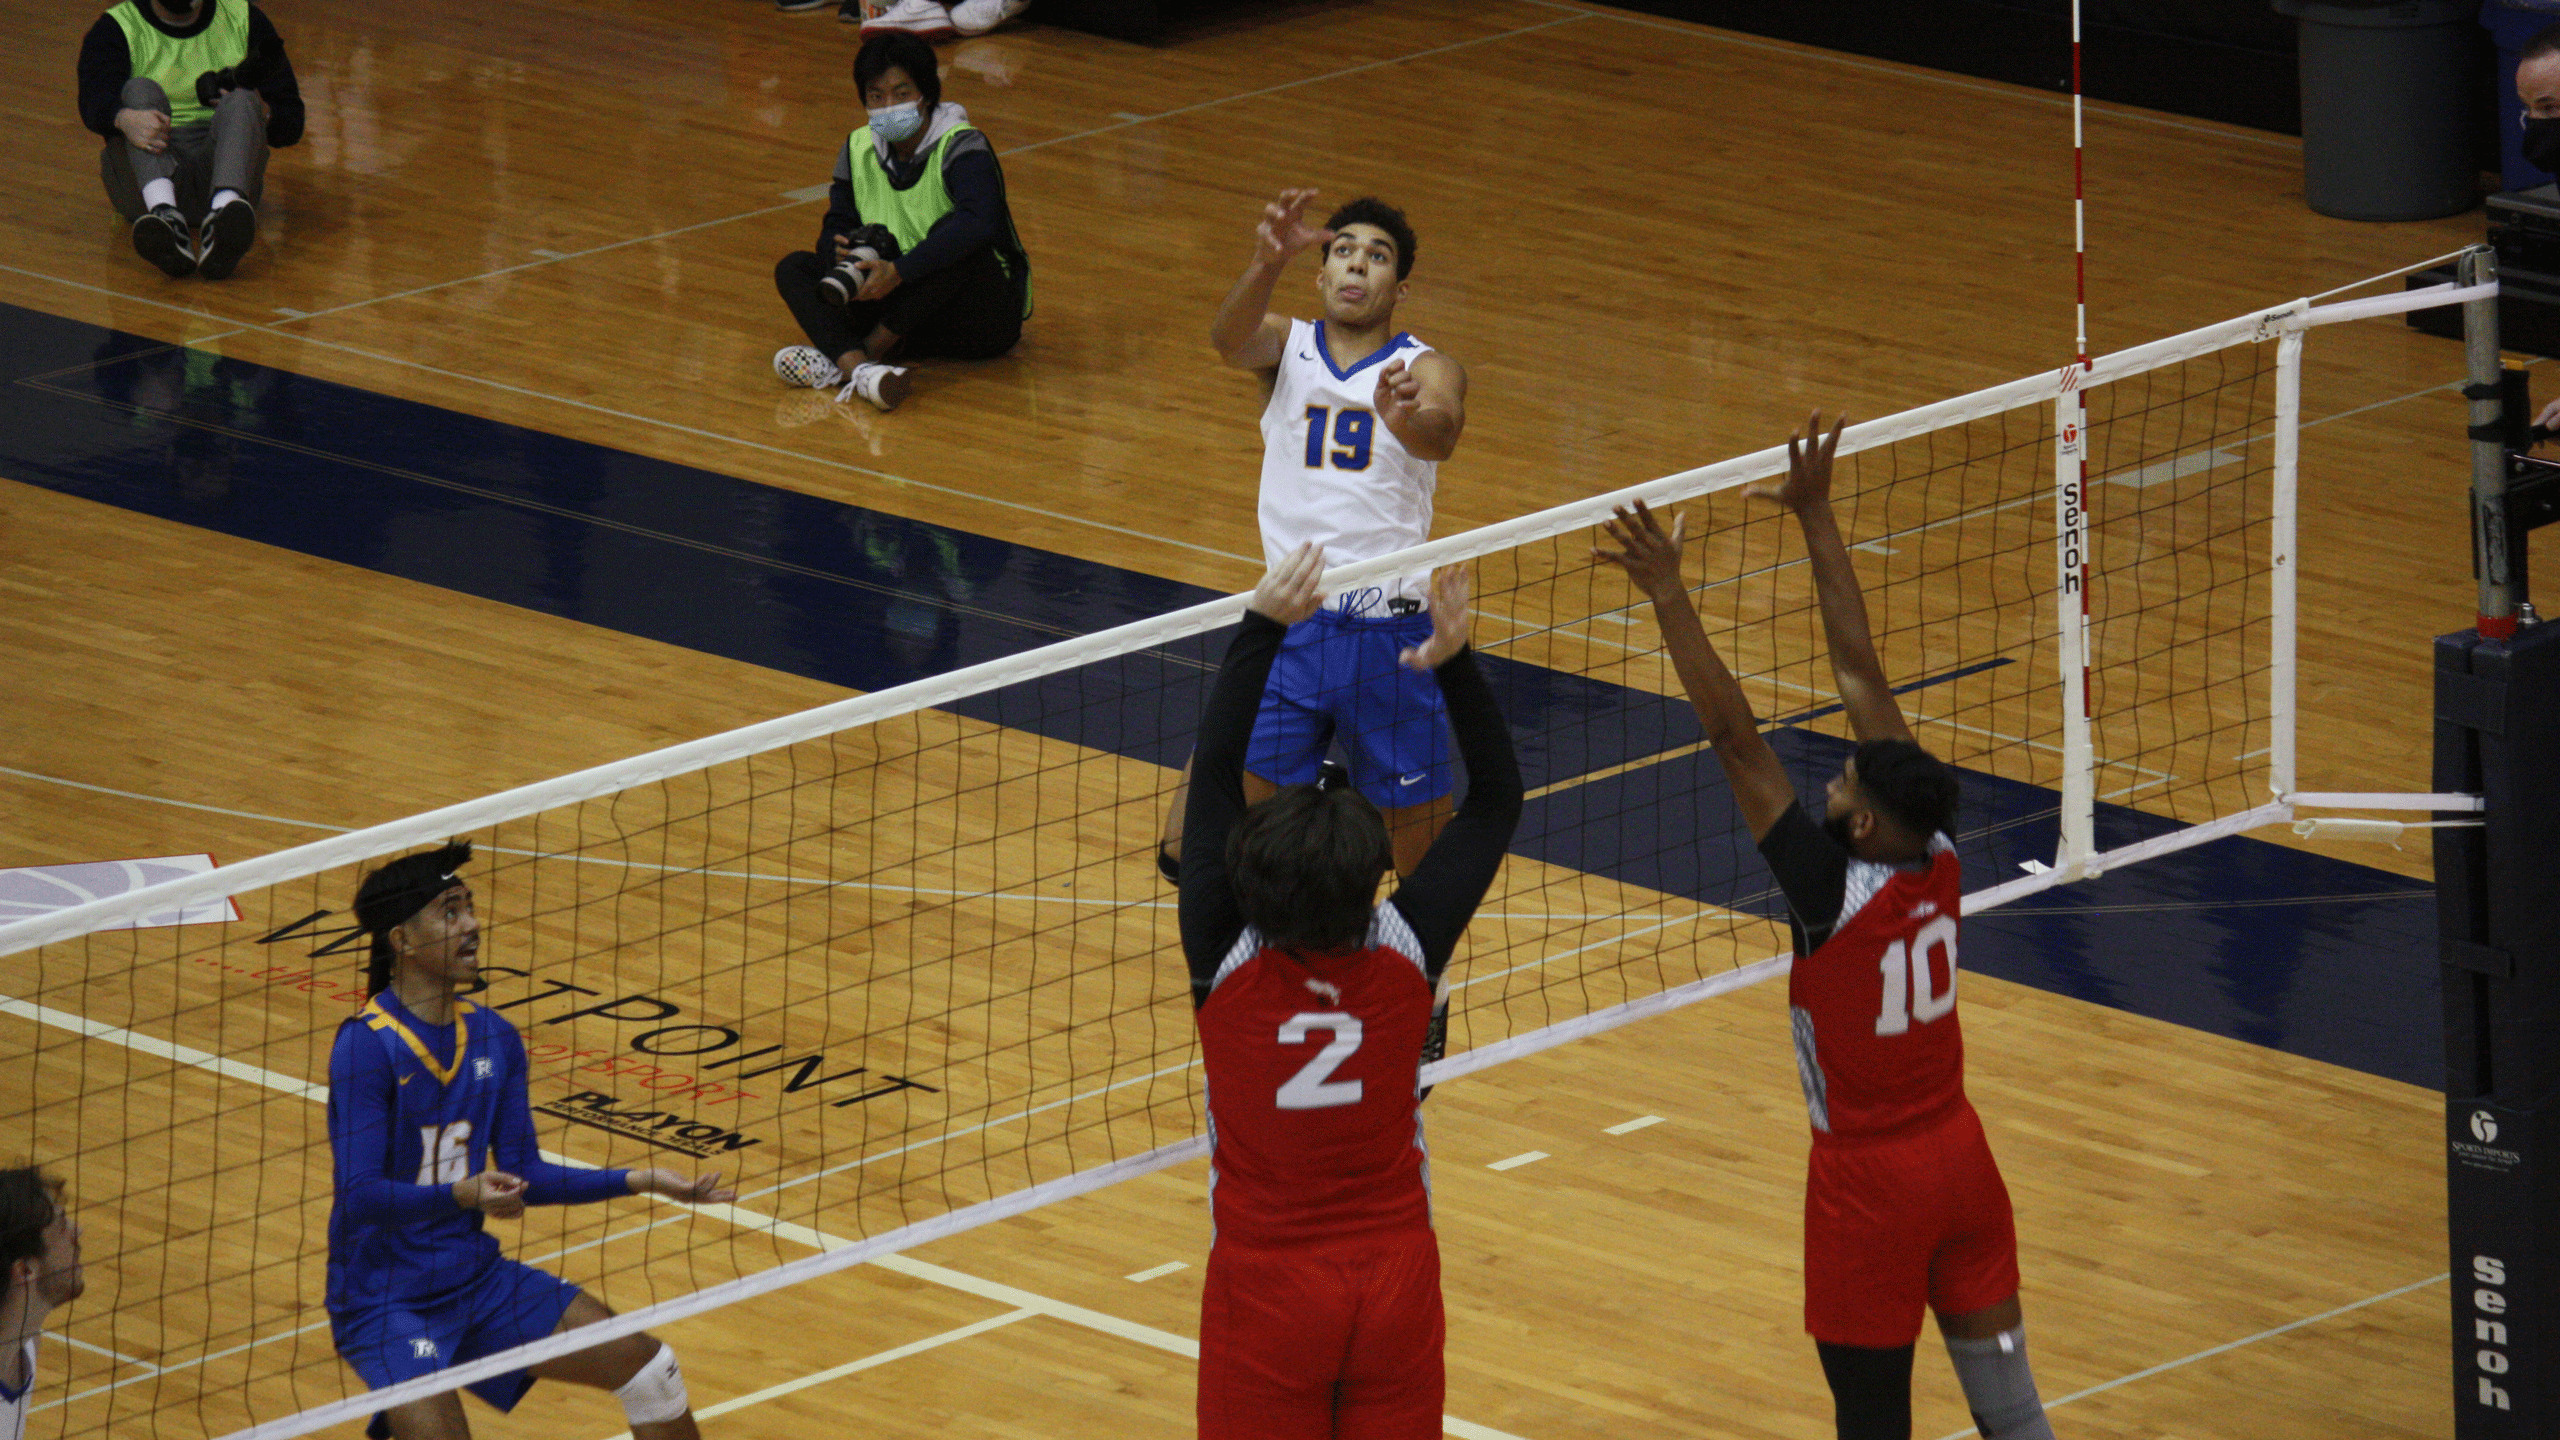 A Rams men's volleyball player in a white jersey goes for a kill